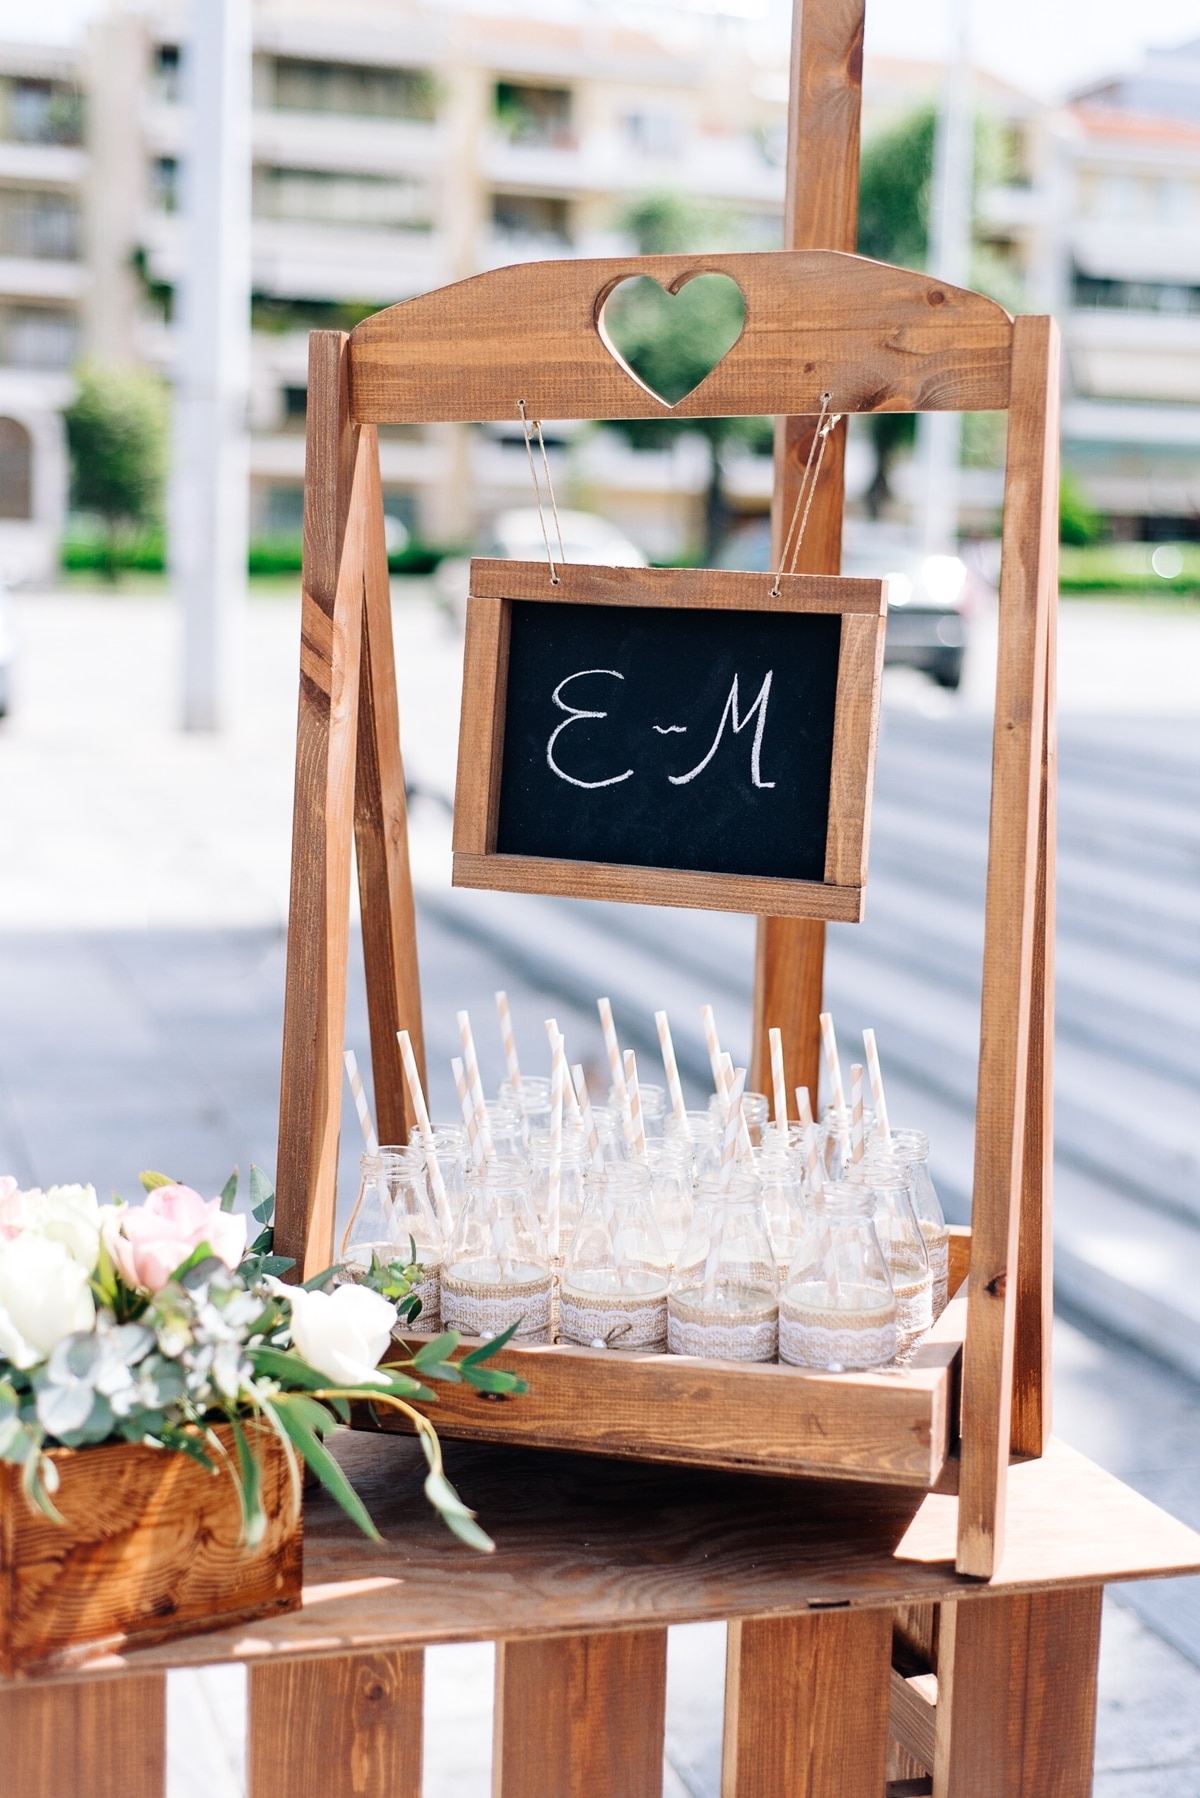 Fresh drinks for the wedding guests